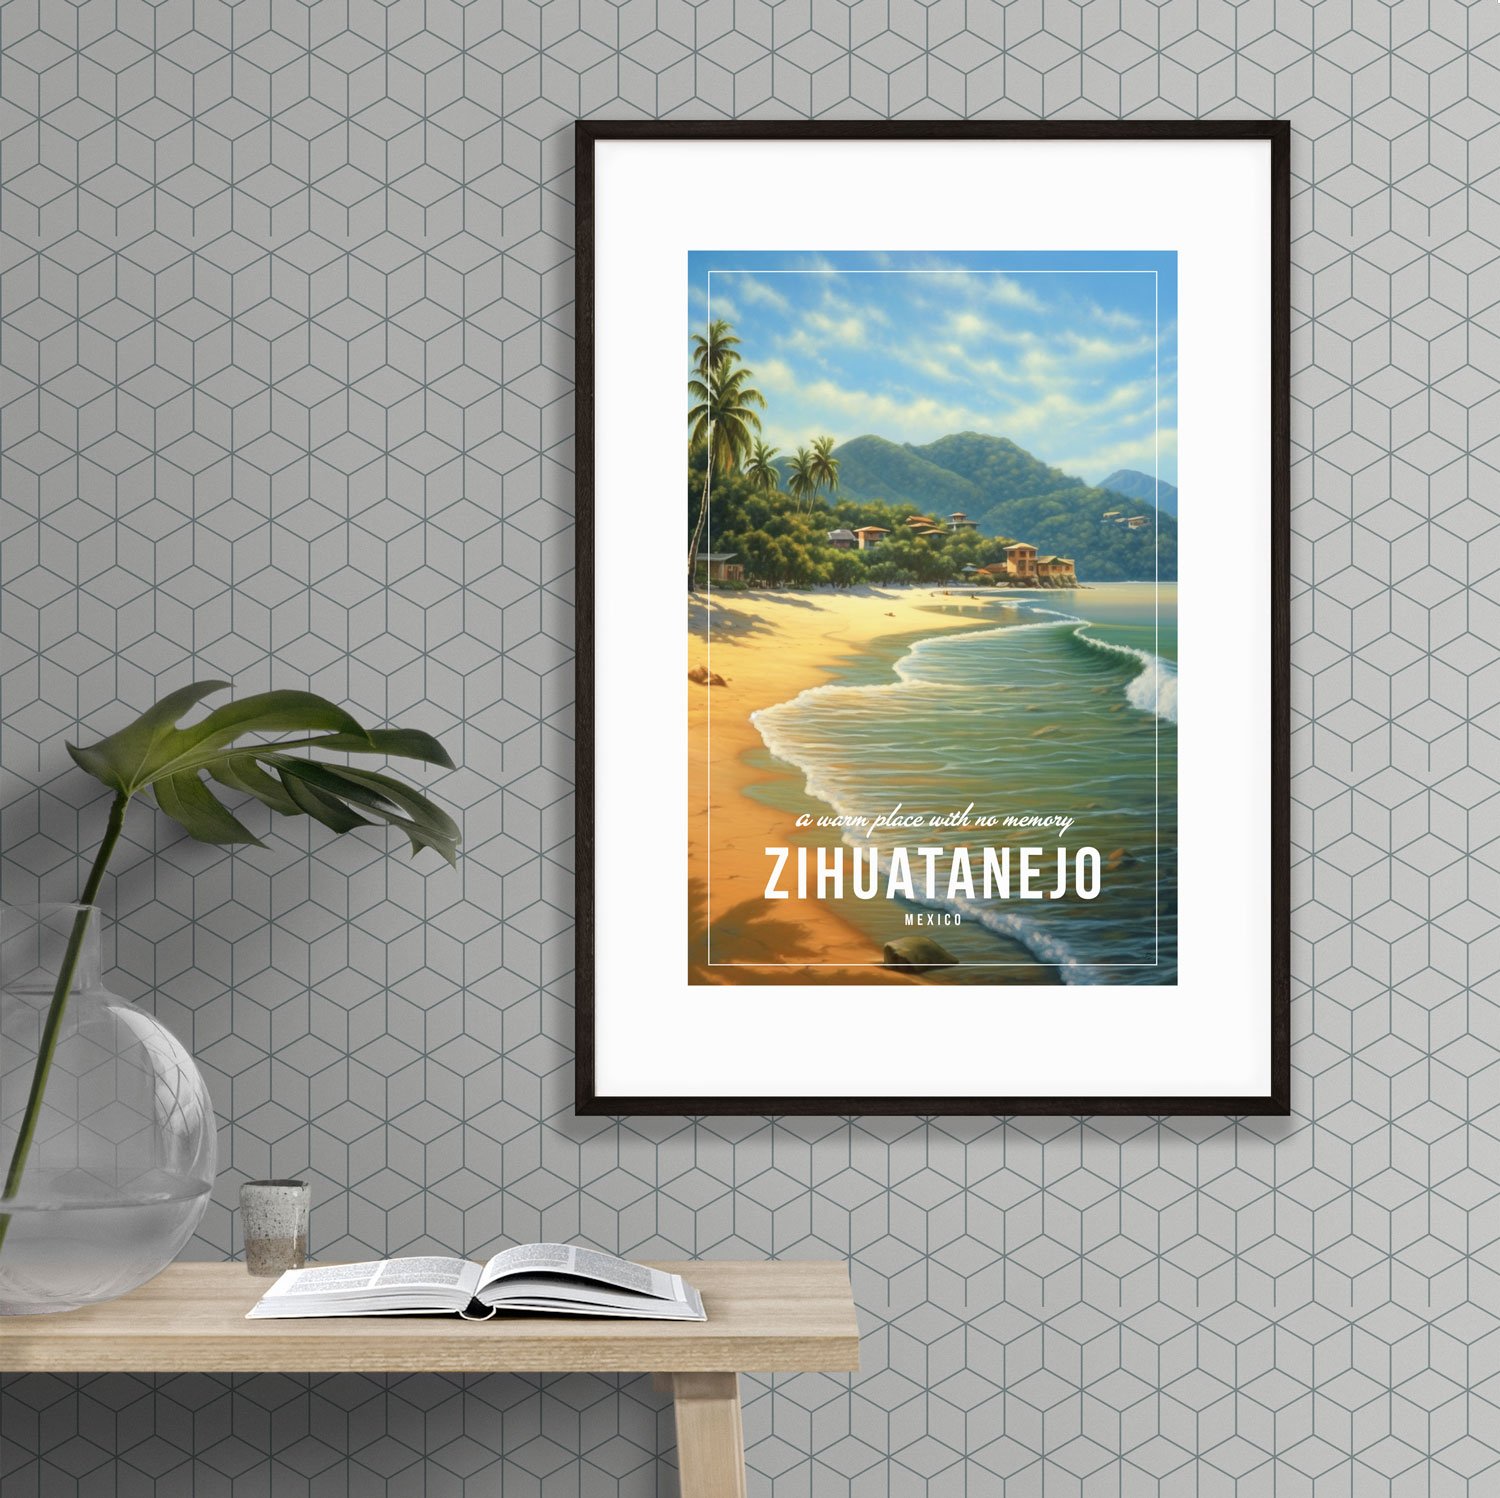 Zihuatanejo poster inspired by The Shawshank Redemption - Posters ...